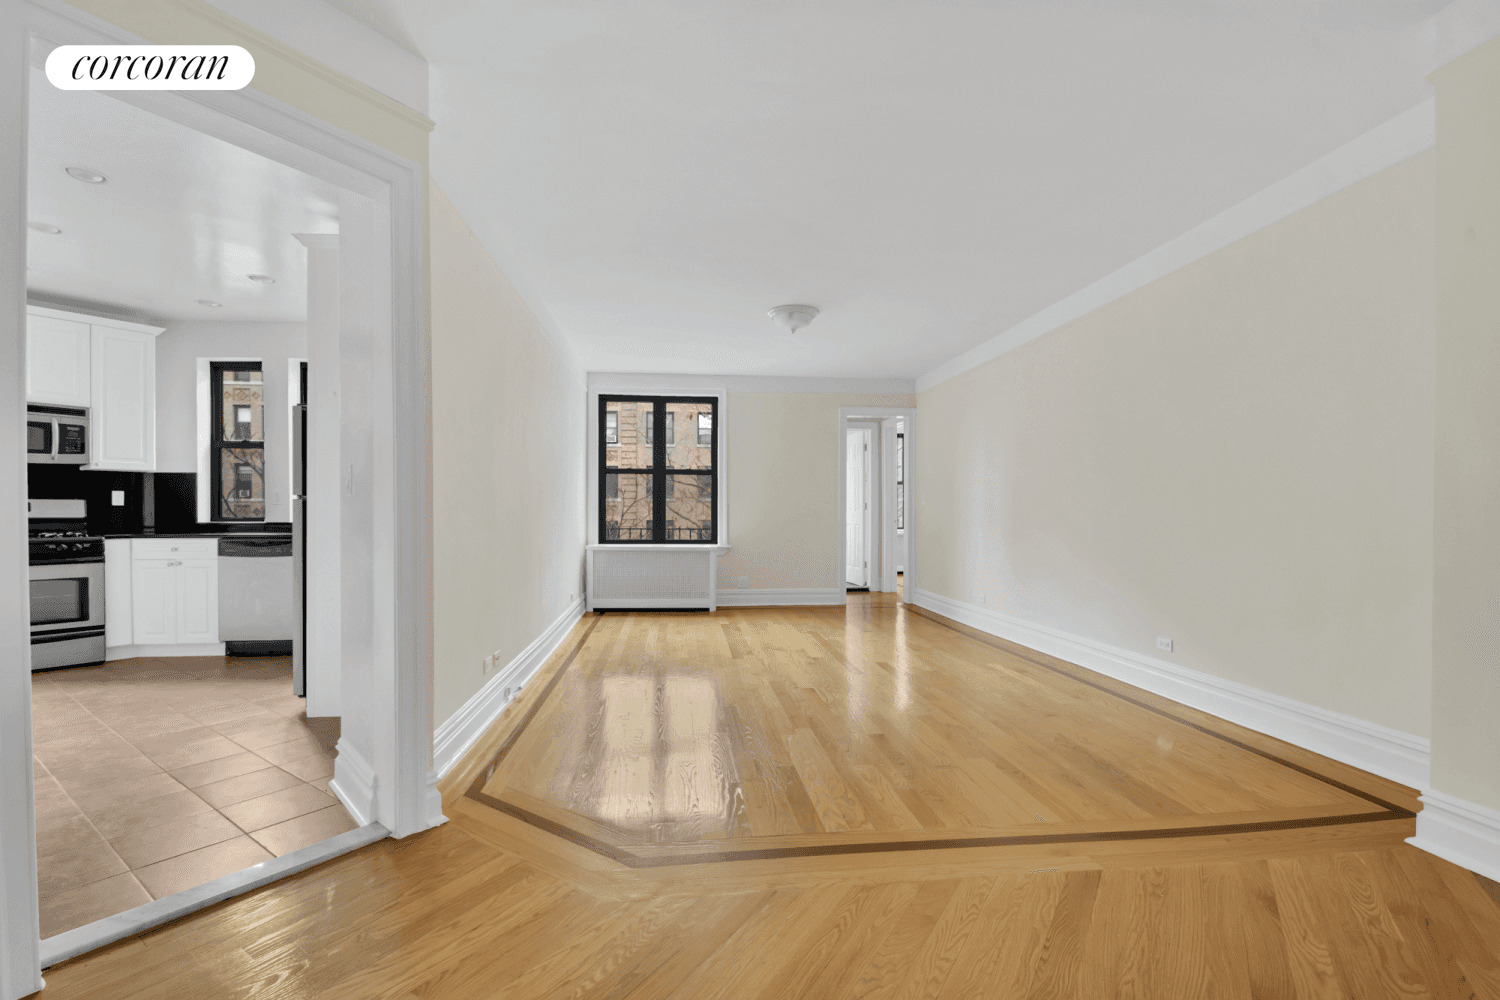 Welcome to this top floor apartment on Riverside Drive in the gorgeous Audubon Terrace Historic District in a beautiful, pre war elevator building !